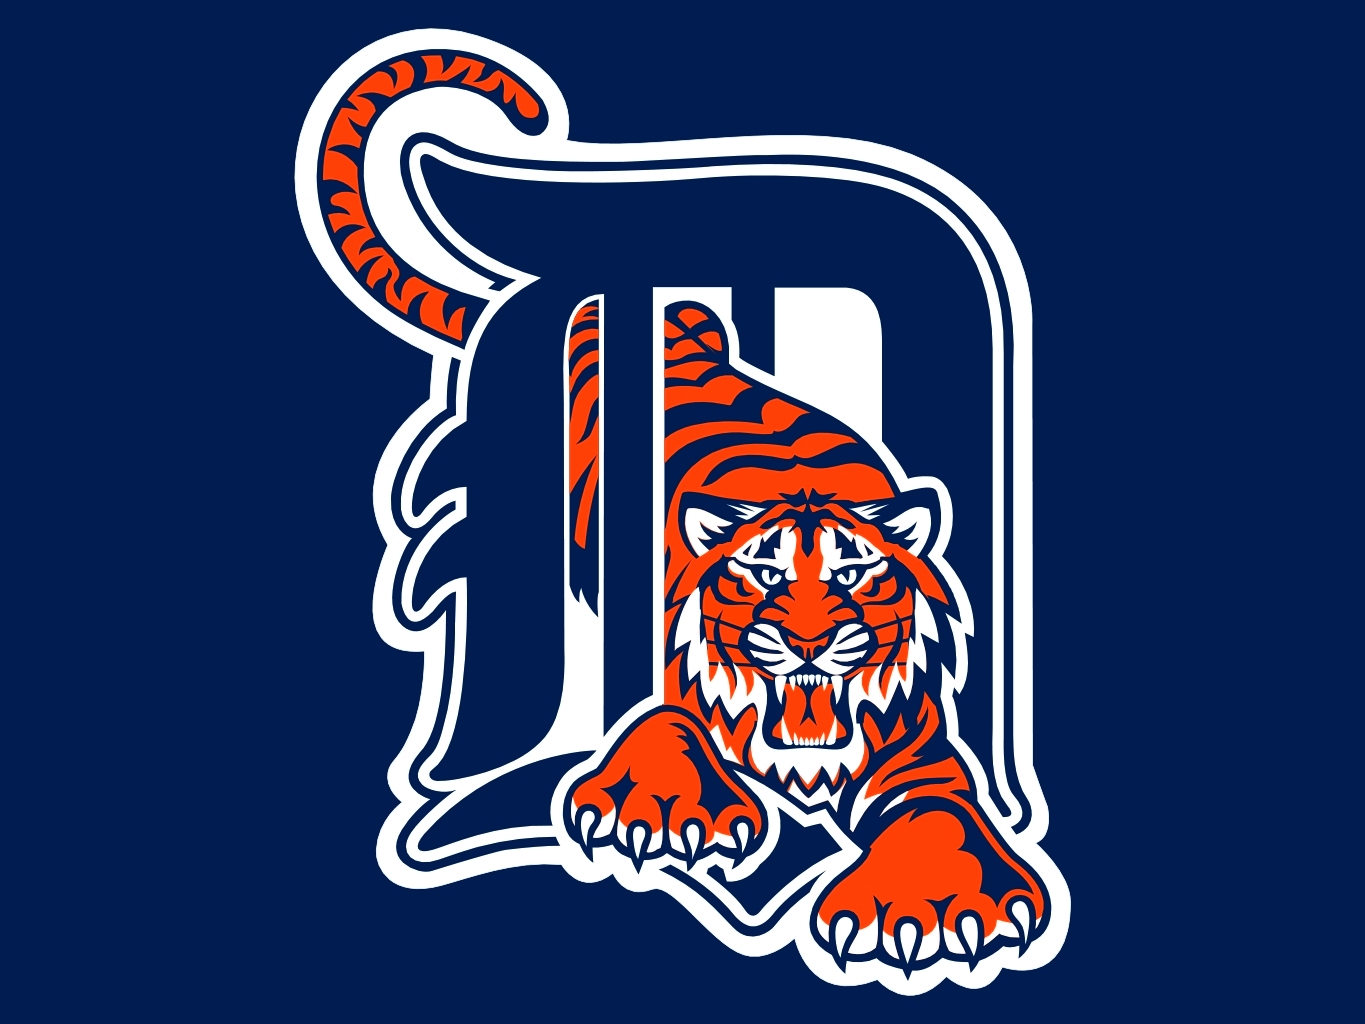 Buy Detroit Tigers Tickets Today